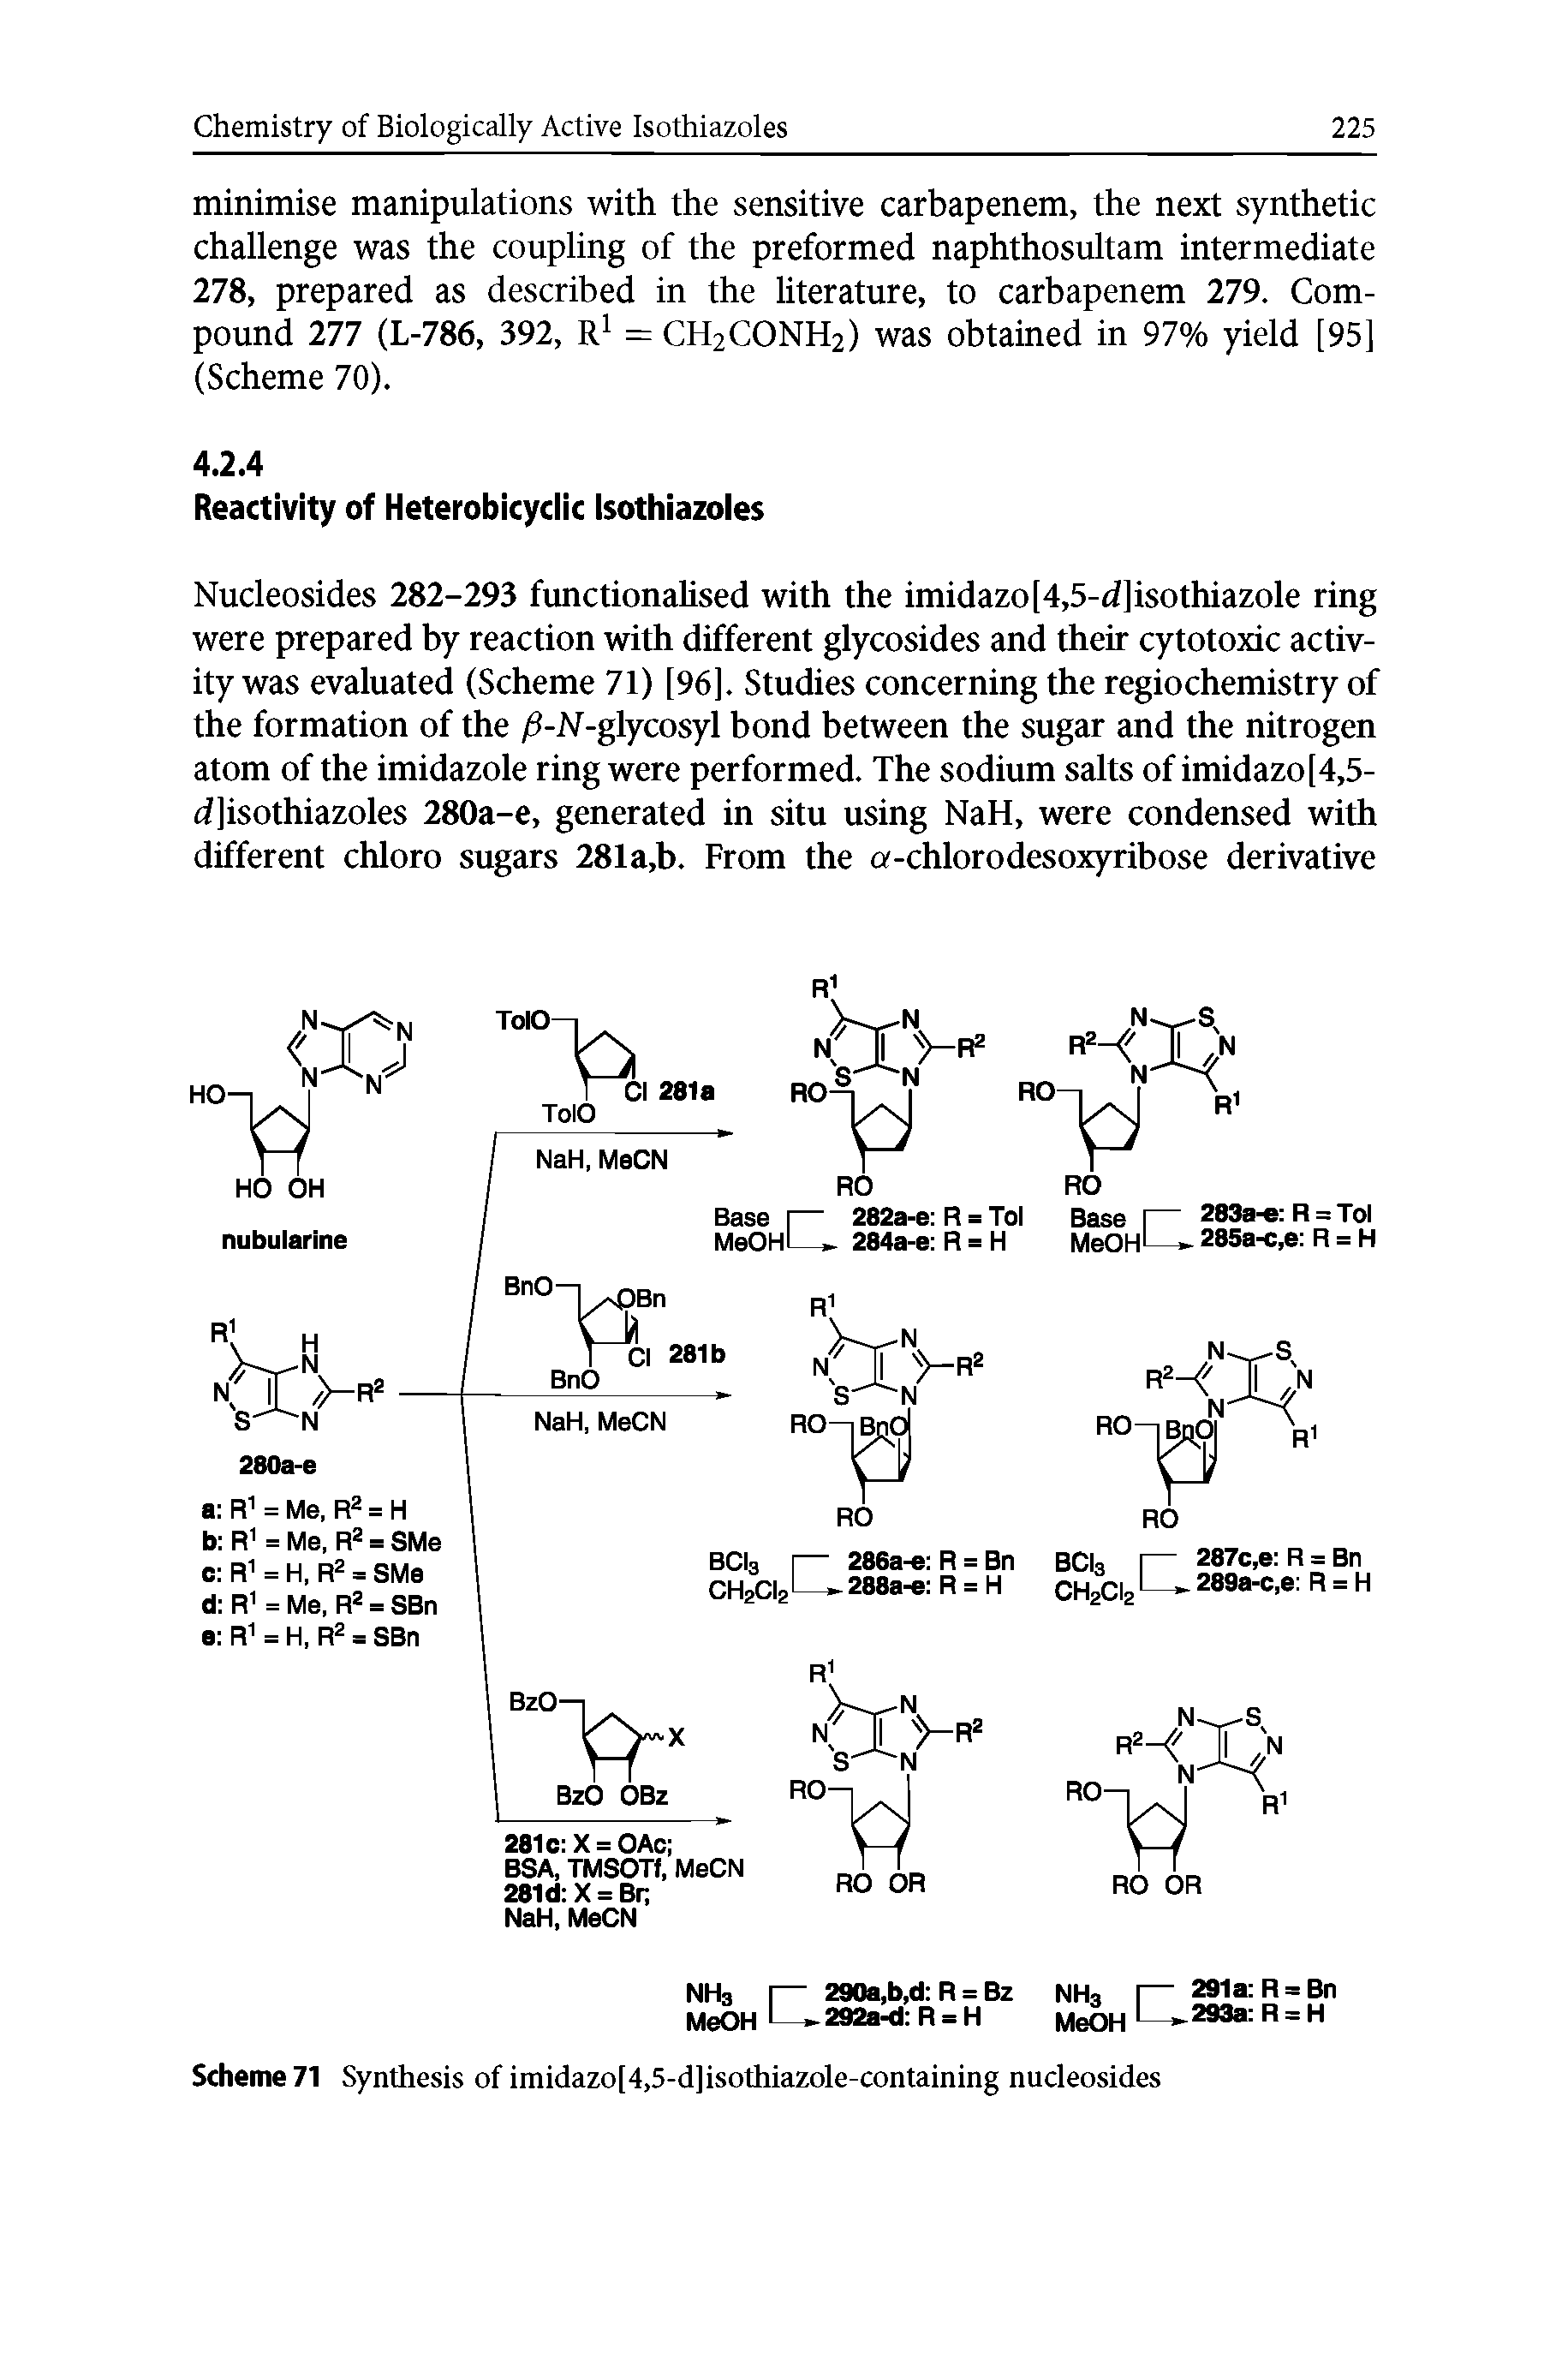 Scheme 71 Synthesis of imidazo[4,5-d]isothiazole-containing nucleosides...